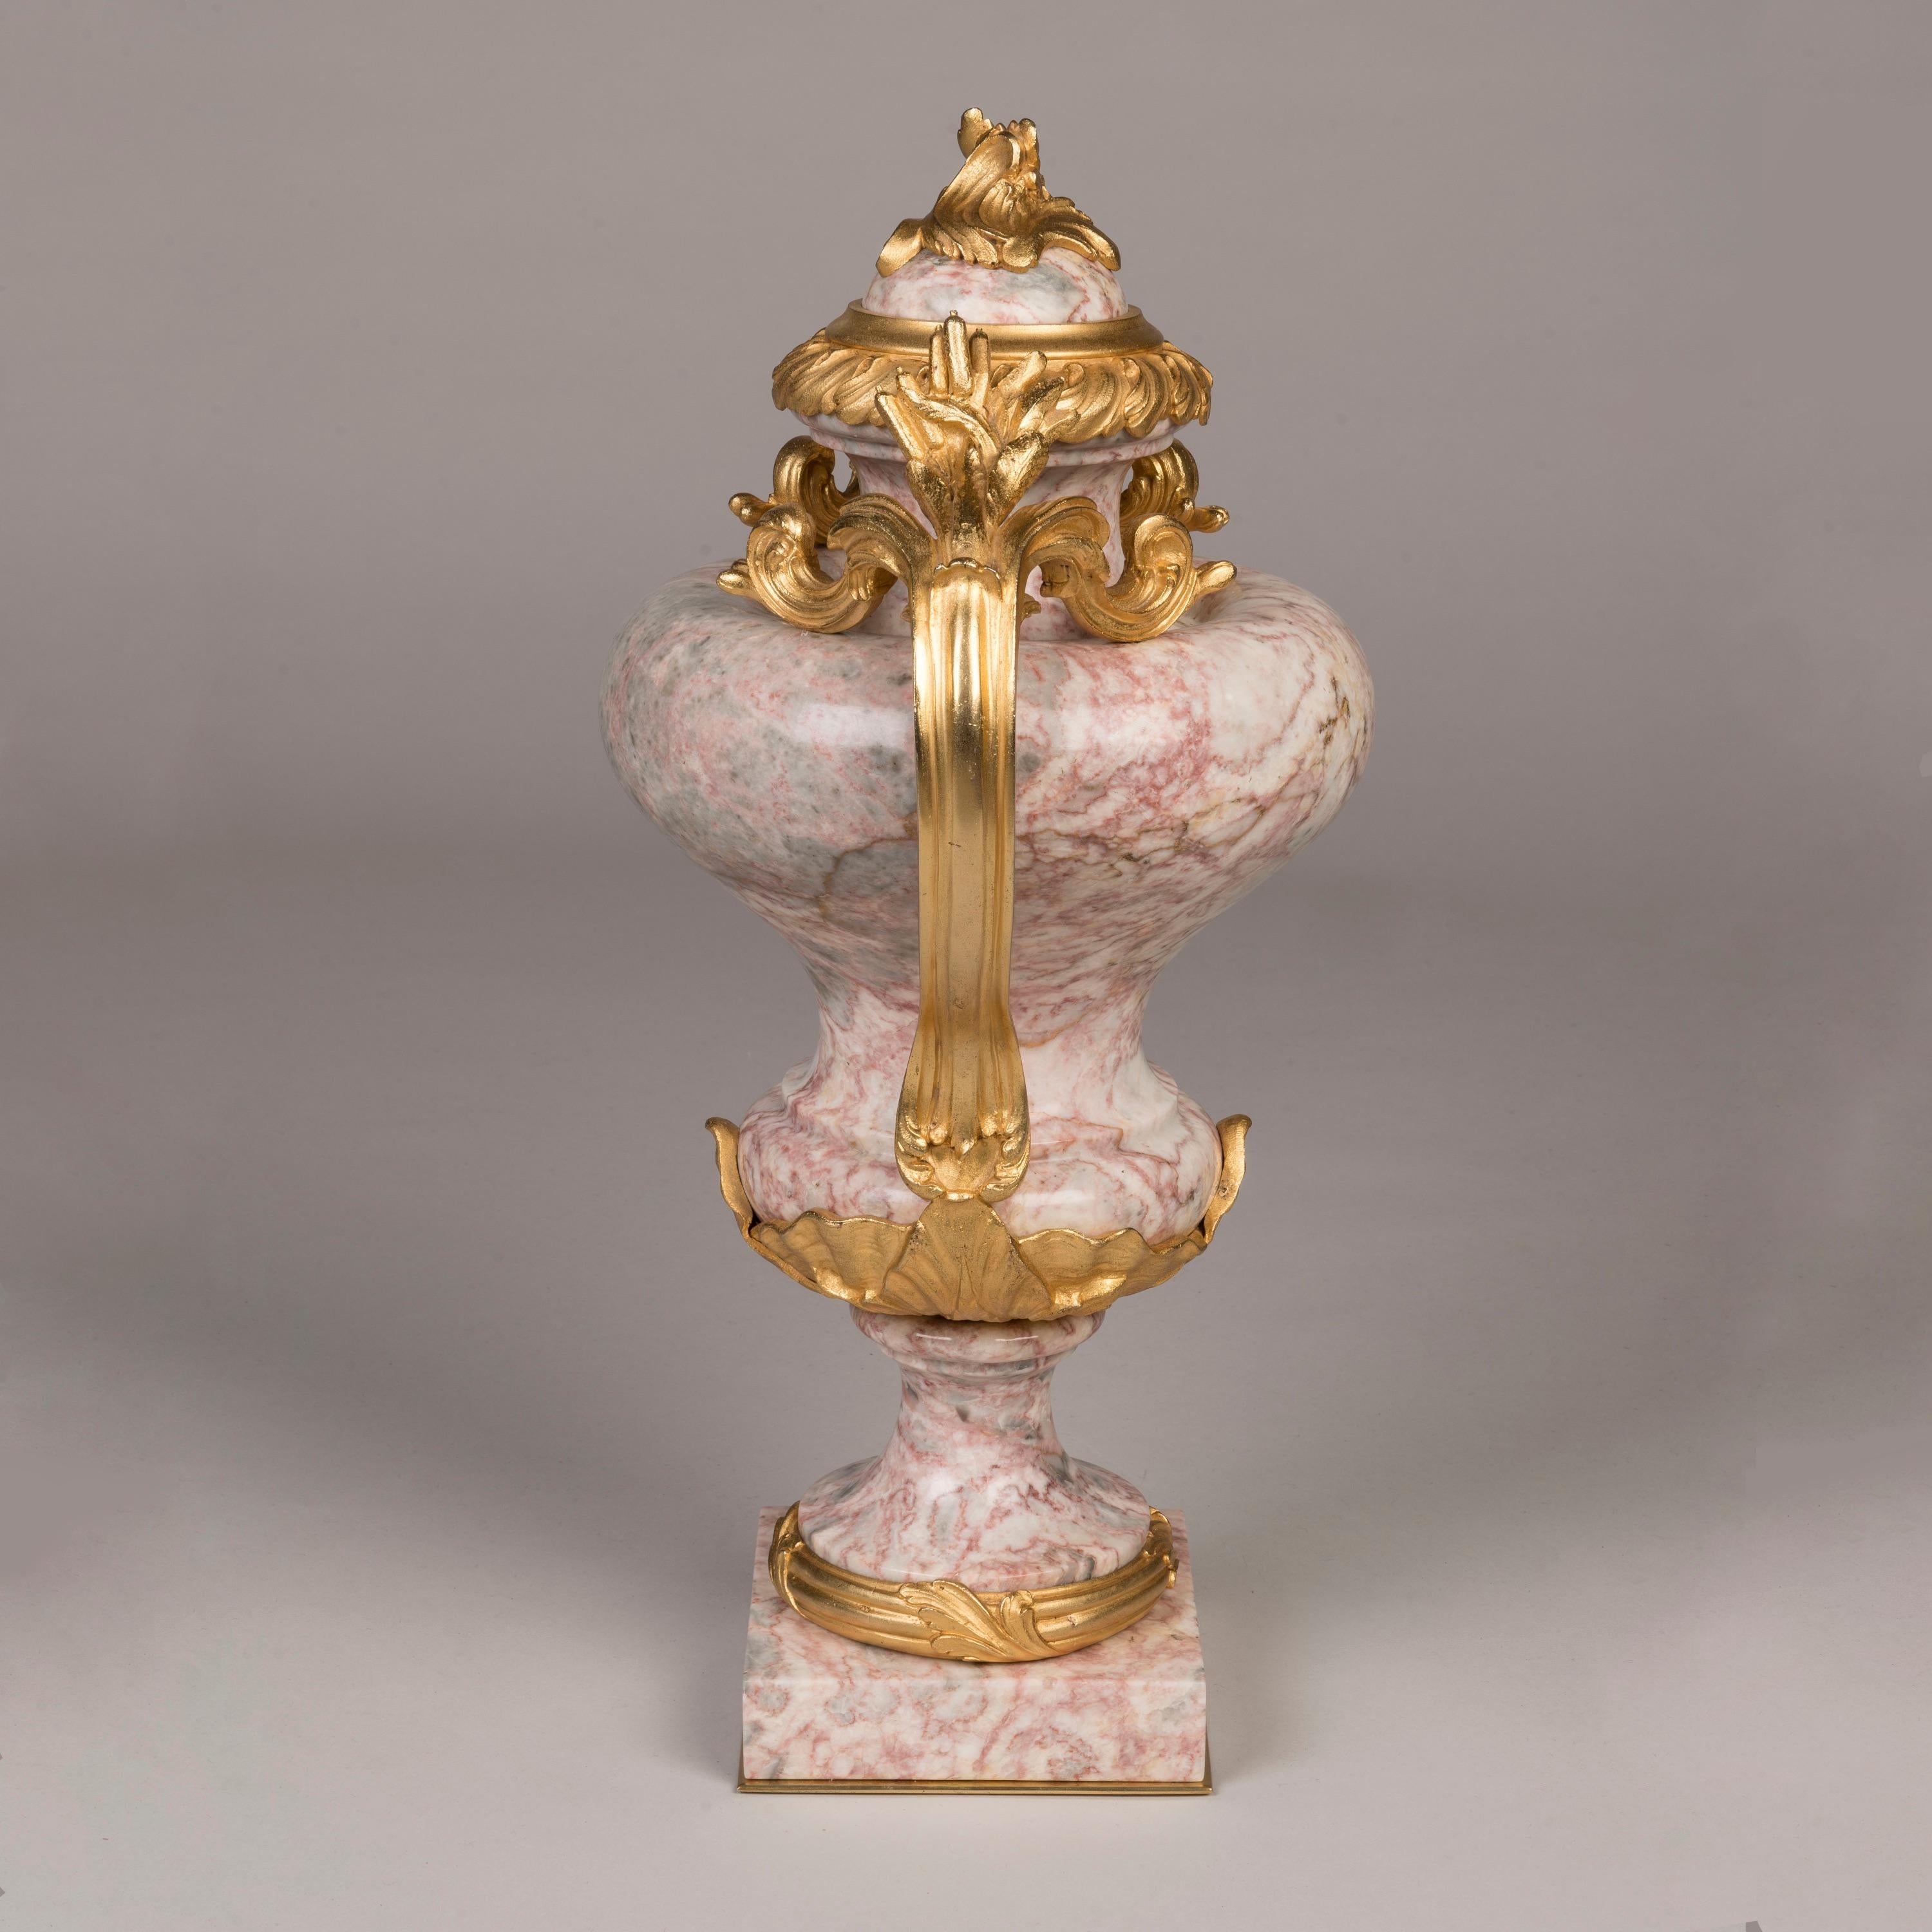 A Pair of Fleur de Pêcher Marble Vases
In the Louis XV Manner

Constructed from Italian fleur de pêcher marble and ormolu mounted, the pair of ovoid baluster vases standing on square plinths with gilt collars, each fitted with scrolling acanthus